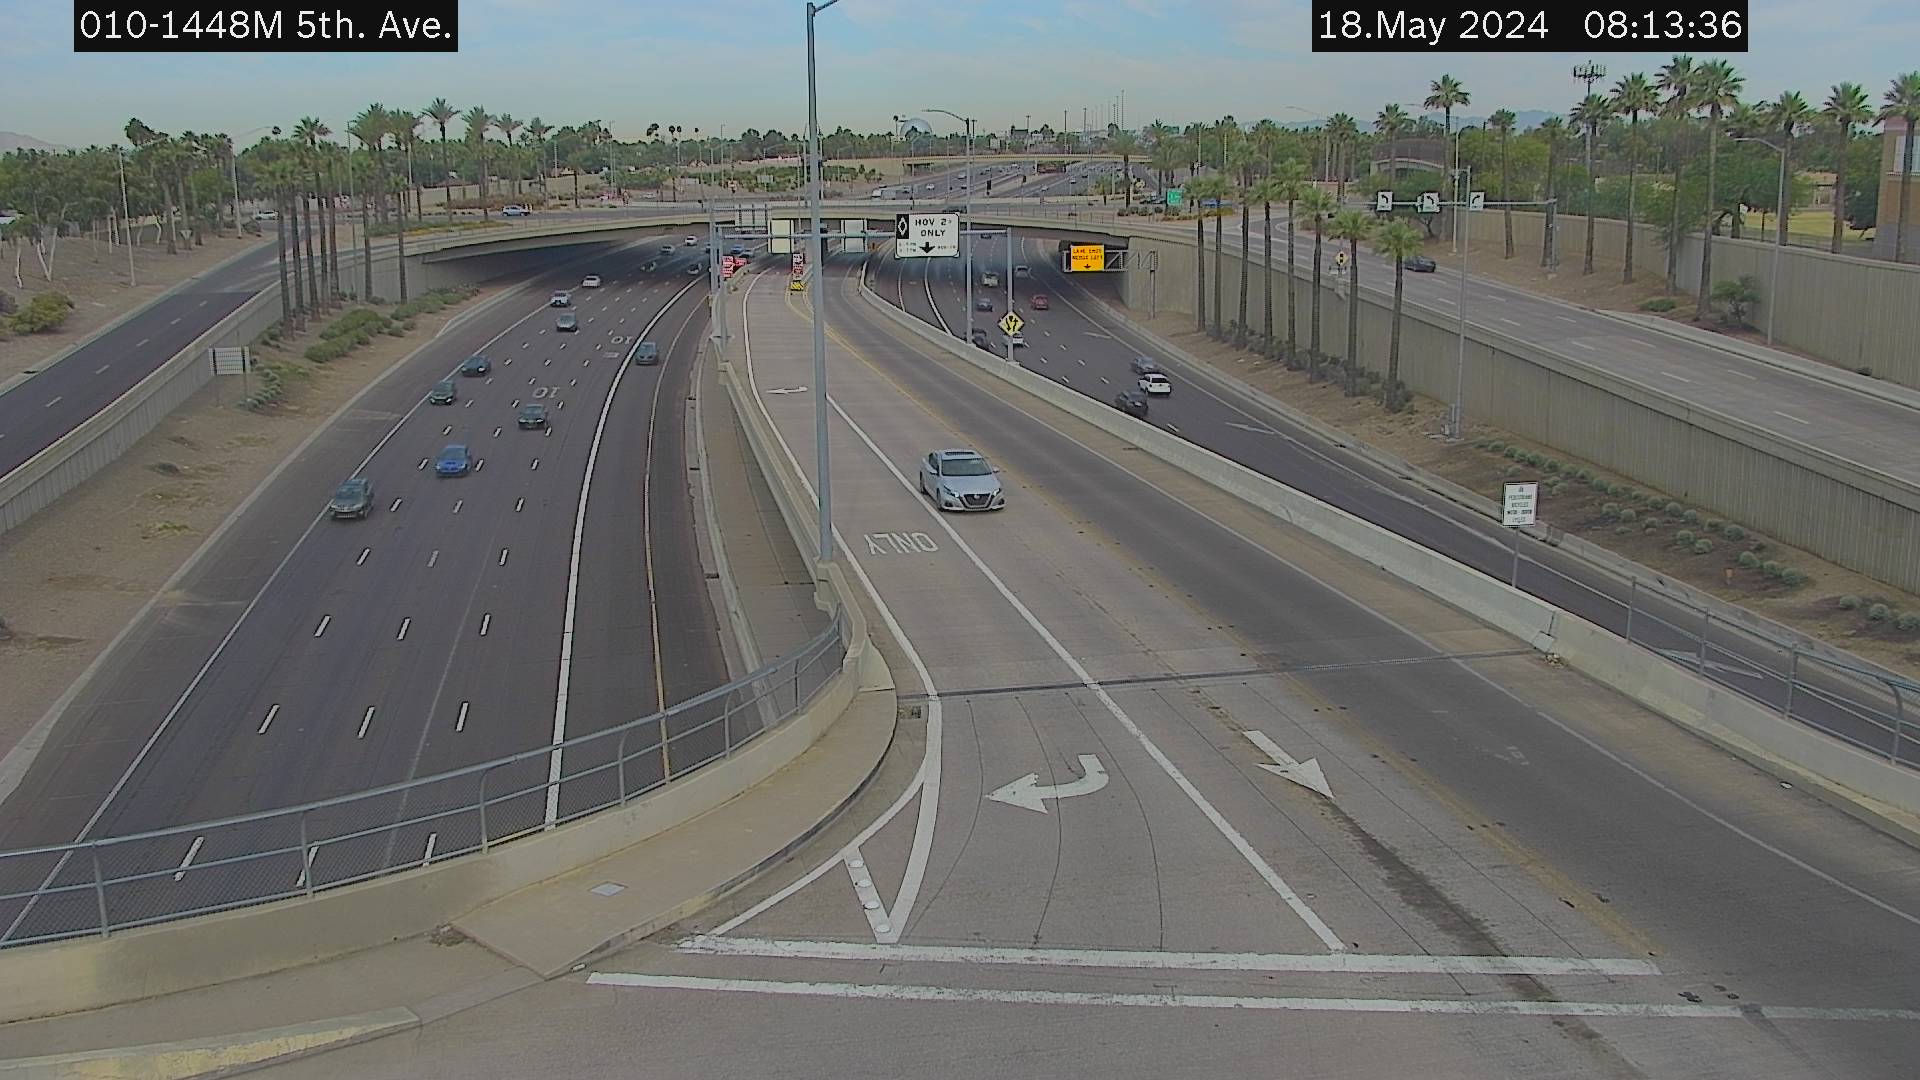 Traffic Cam I-10 M 144.82 @5th ave      -       Player